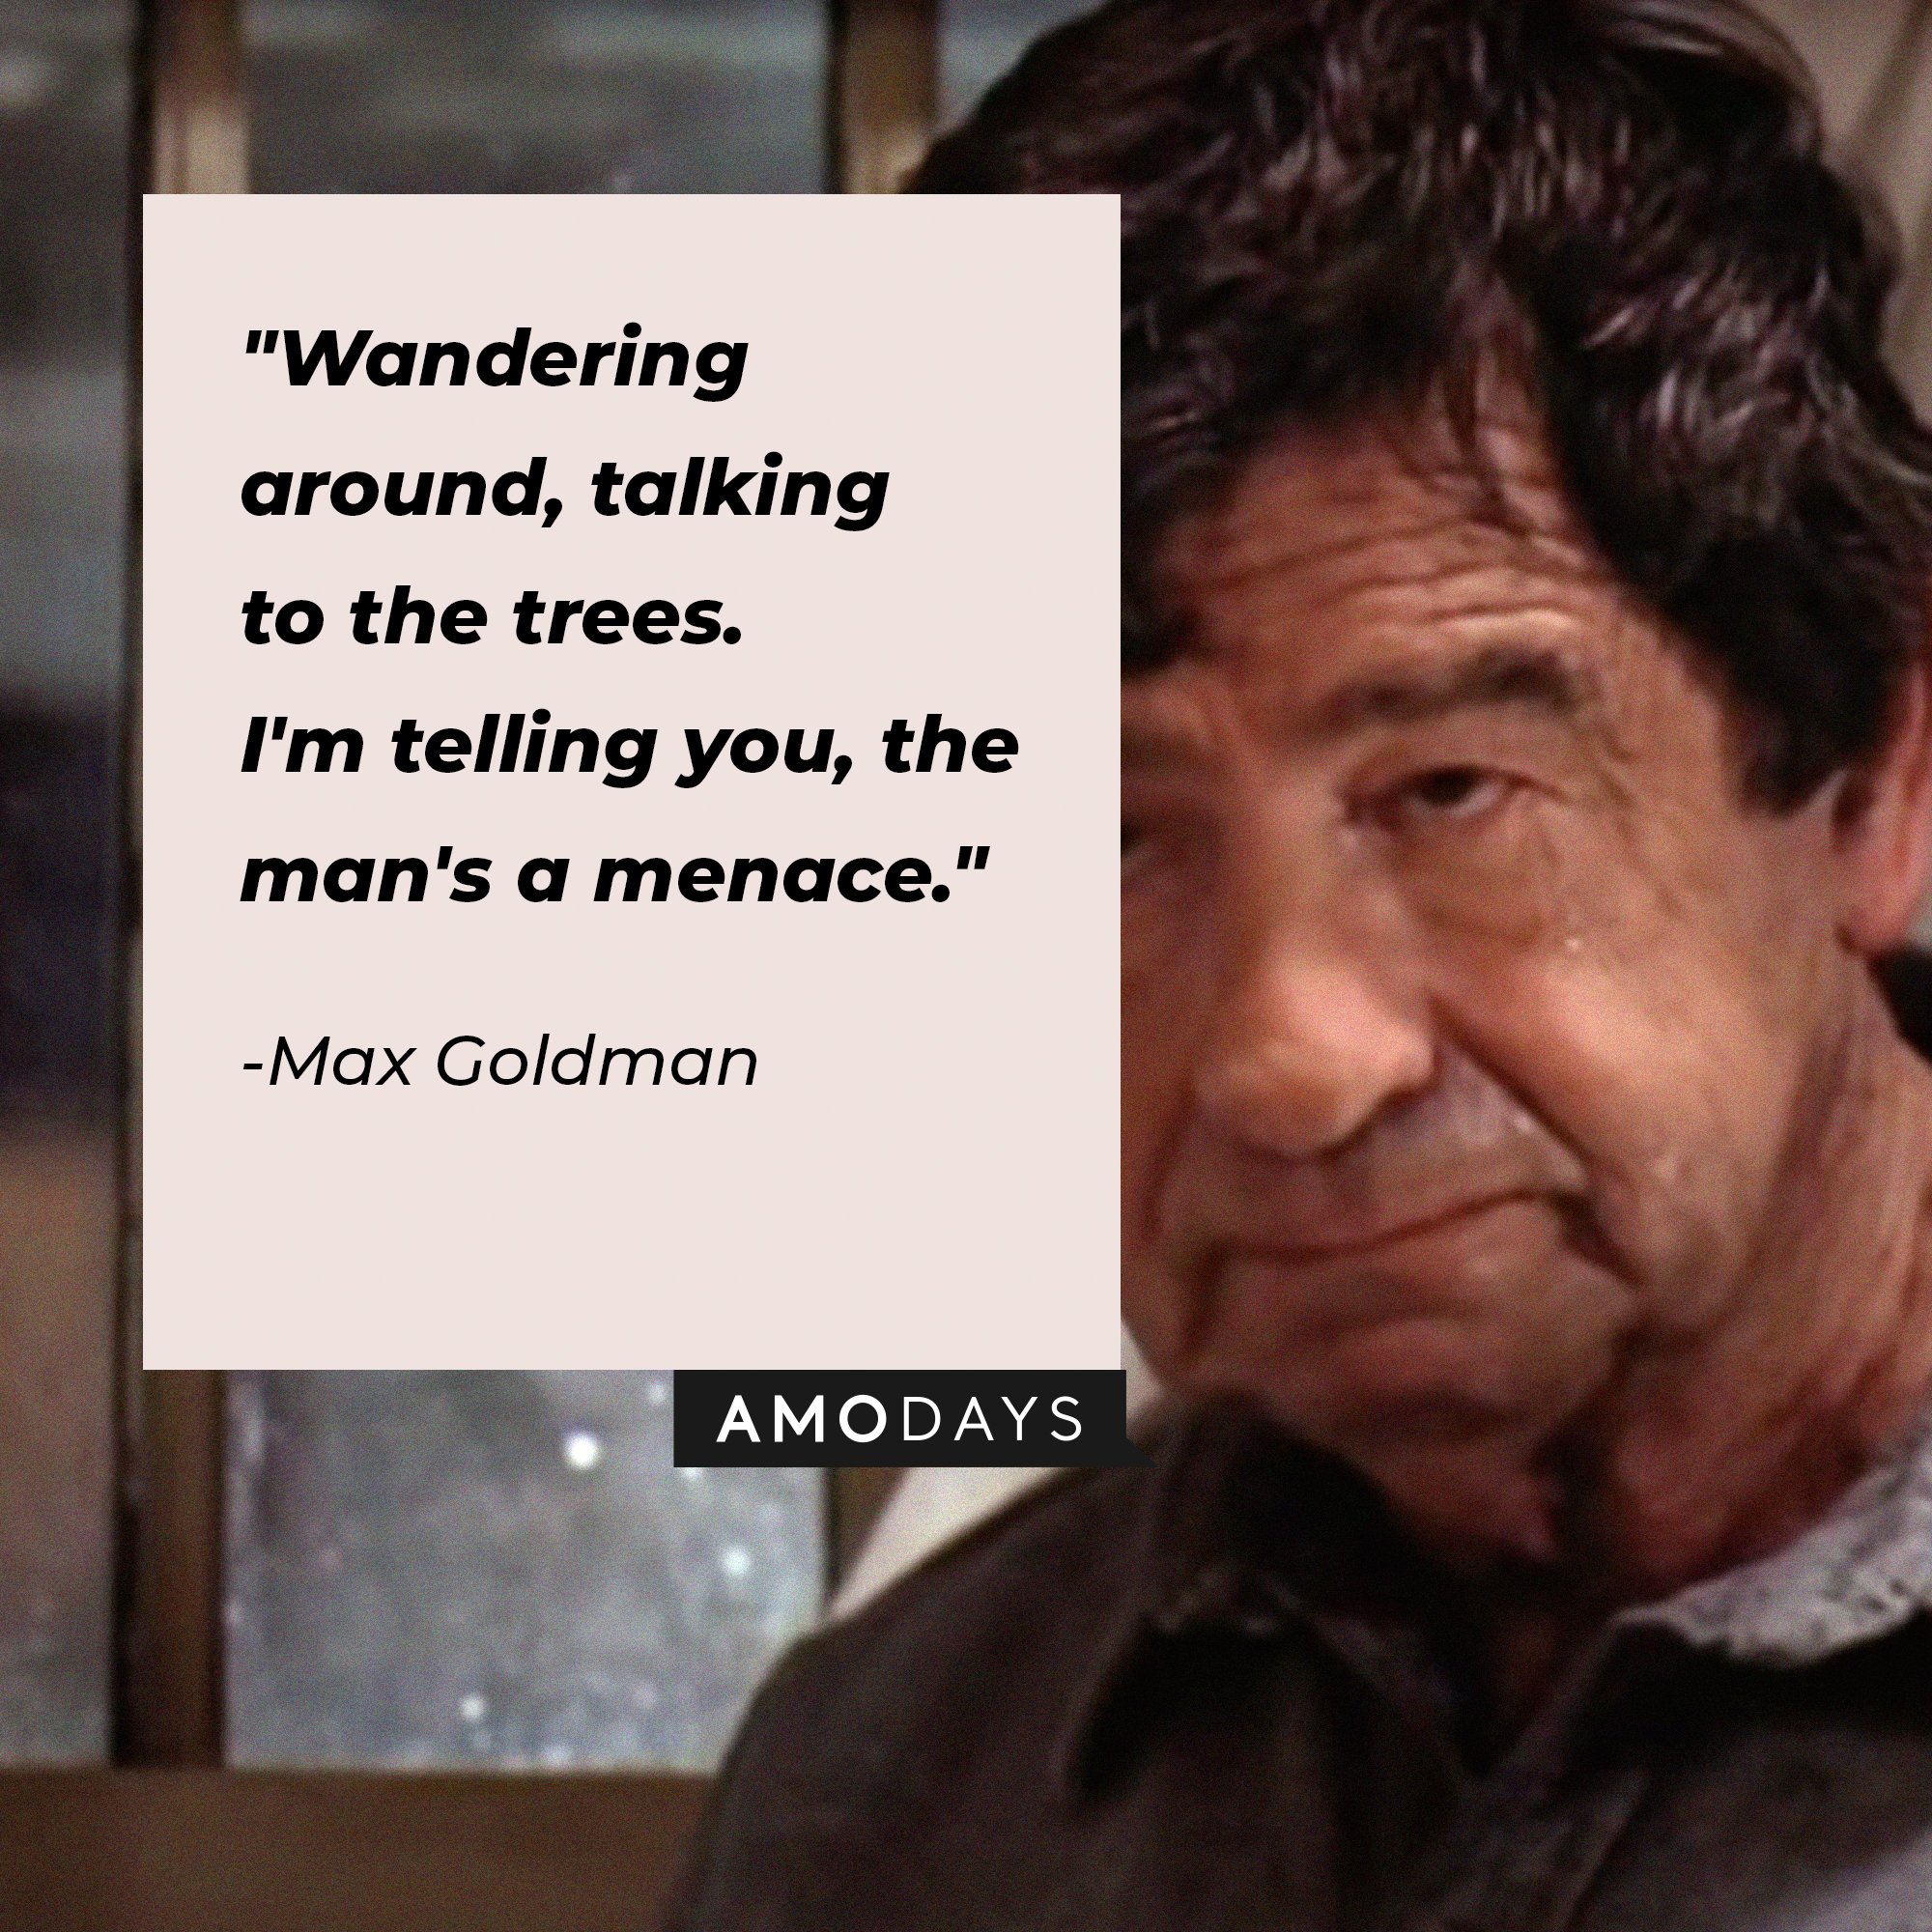 Max Goldman’s quote: “Wandering around, talking to the trees. I'm telling you, the man's a menace.” | Image: AmoDays